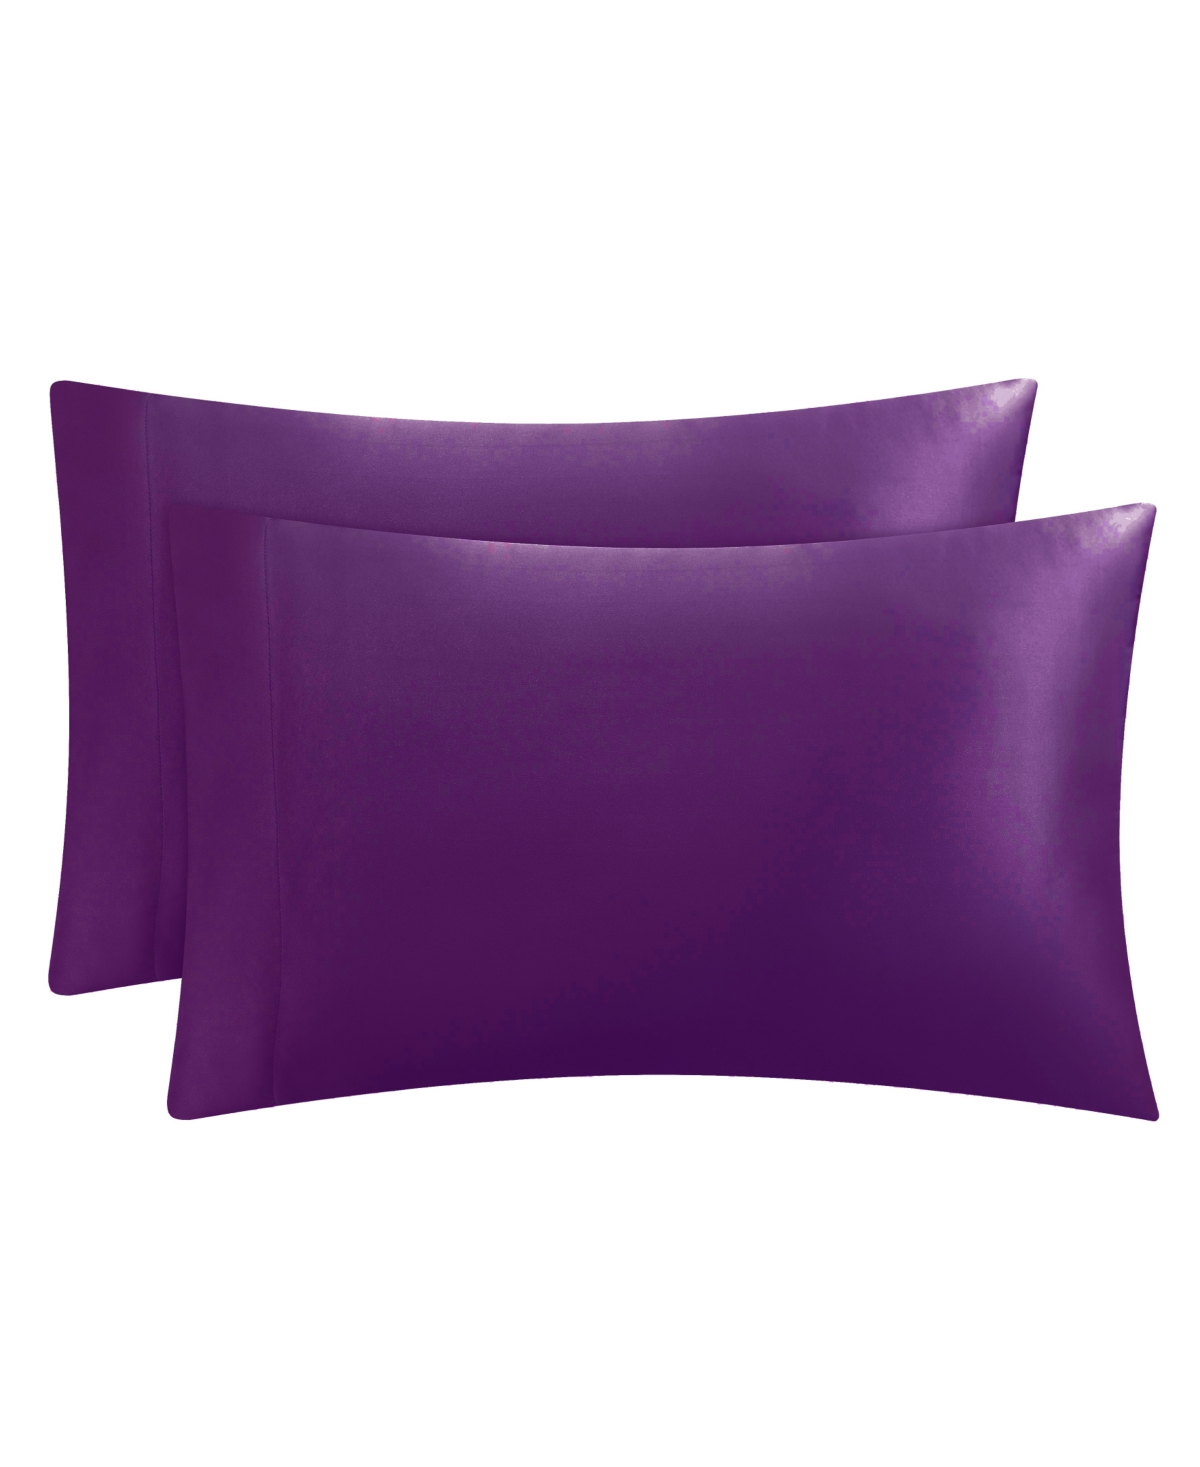 Juicy Couture Satin 2 Piece Pillow Case Set, King In Purple